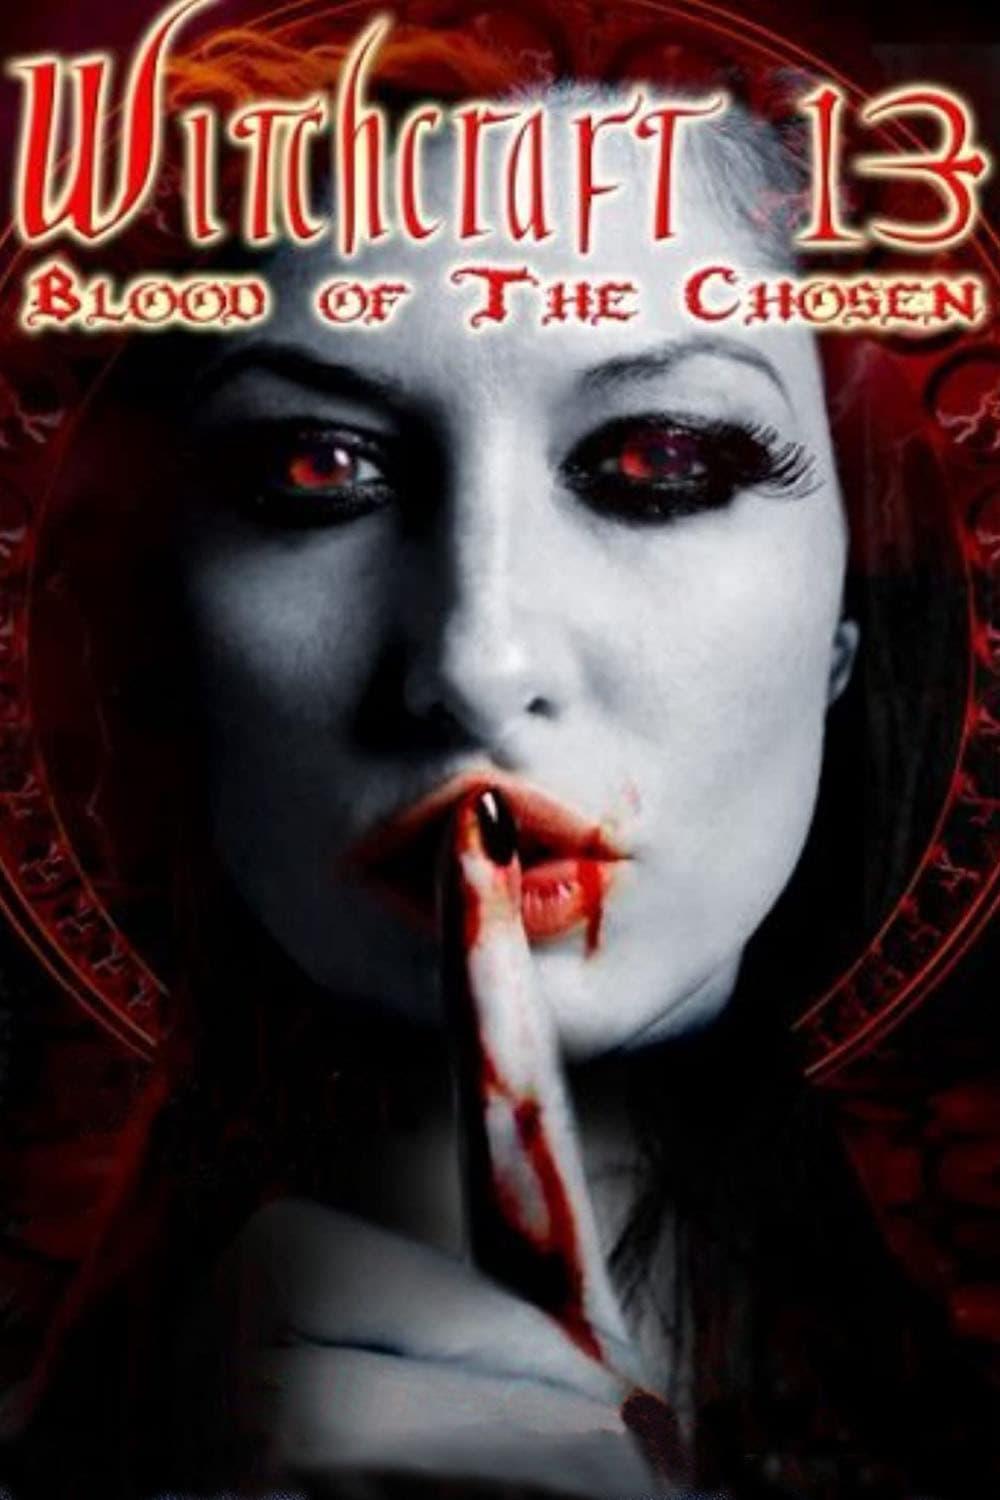 Witchcraft 13: Blood of the Chosen poster